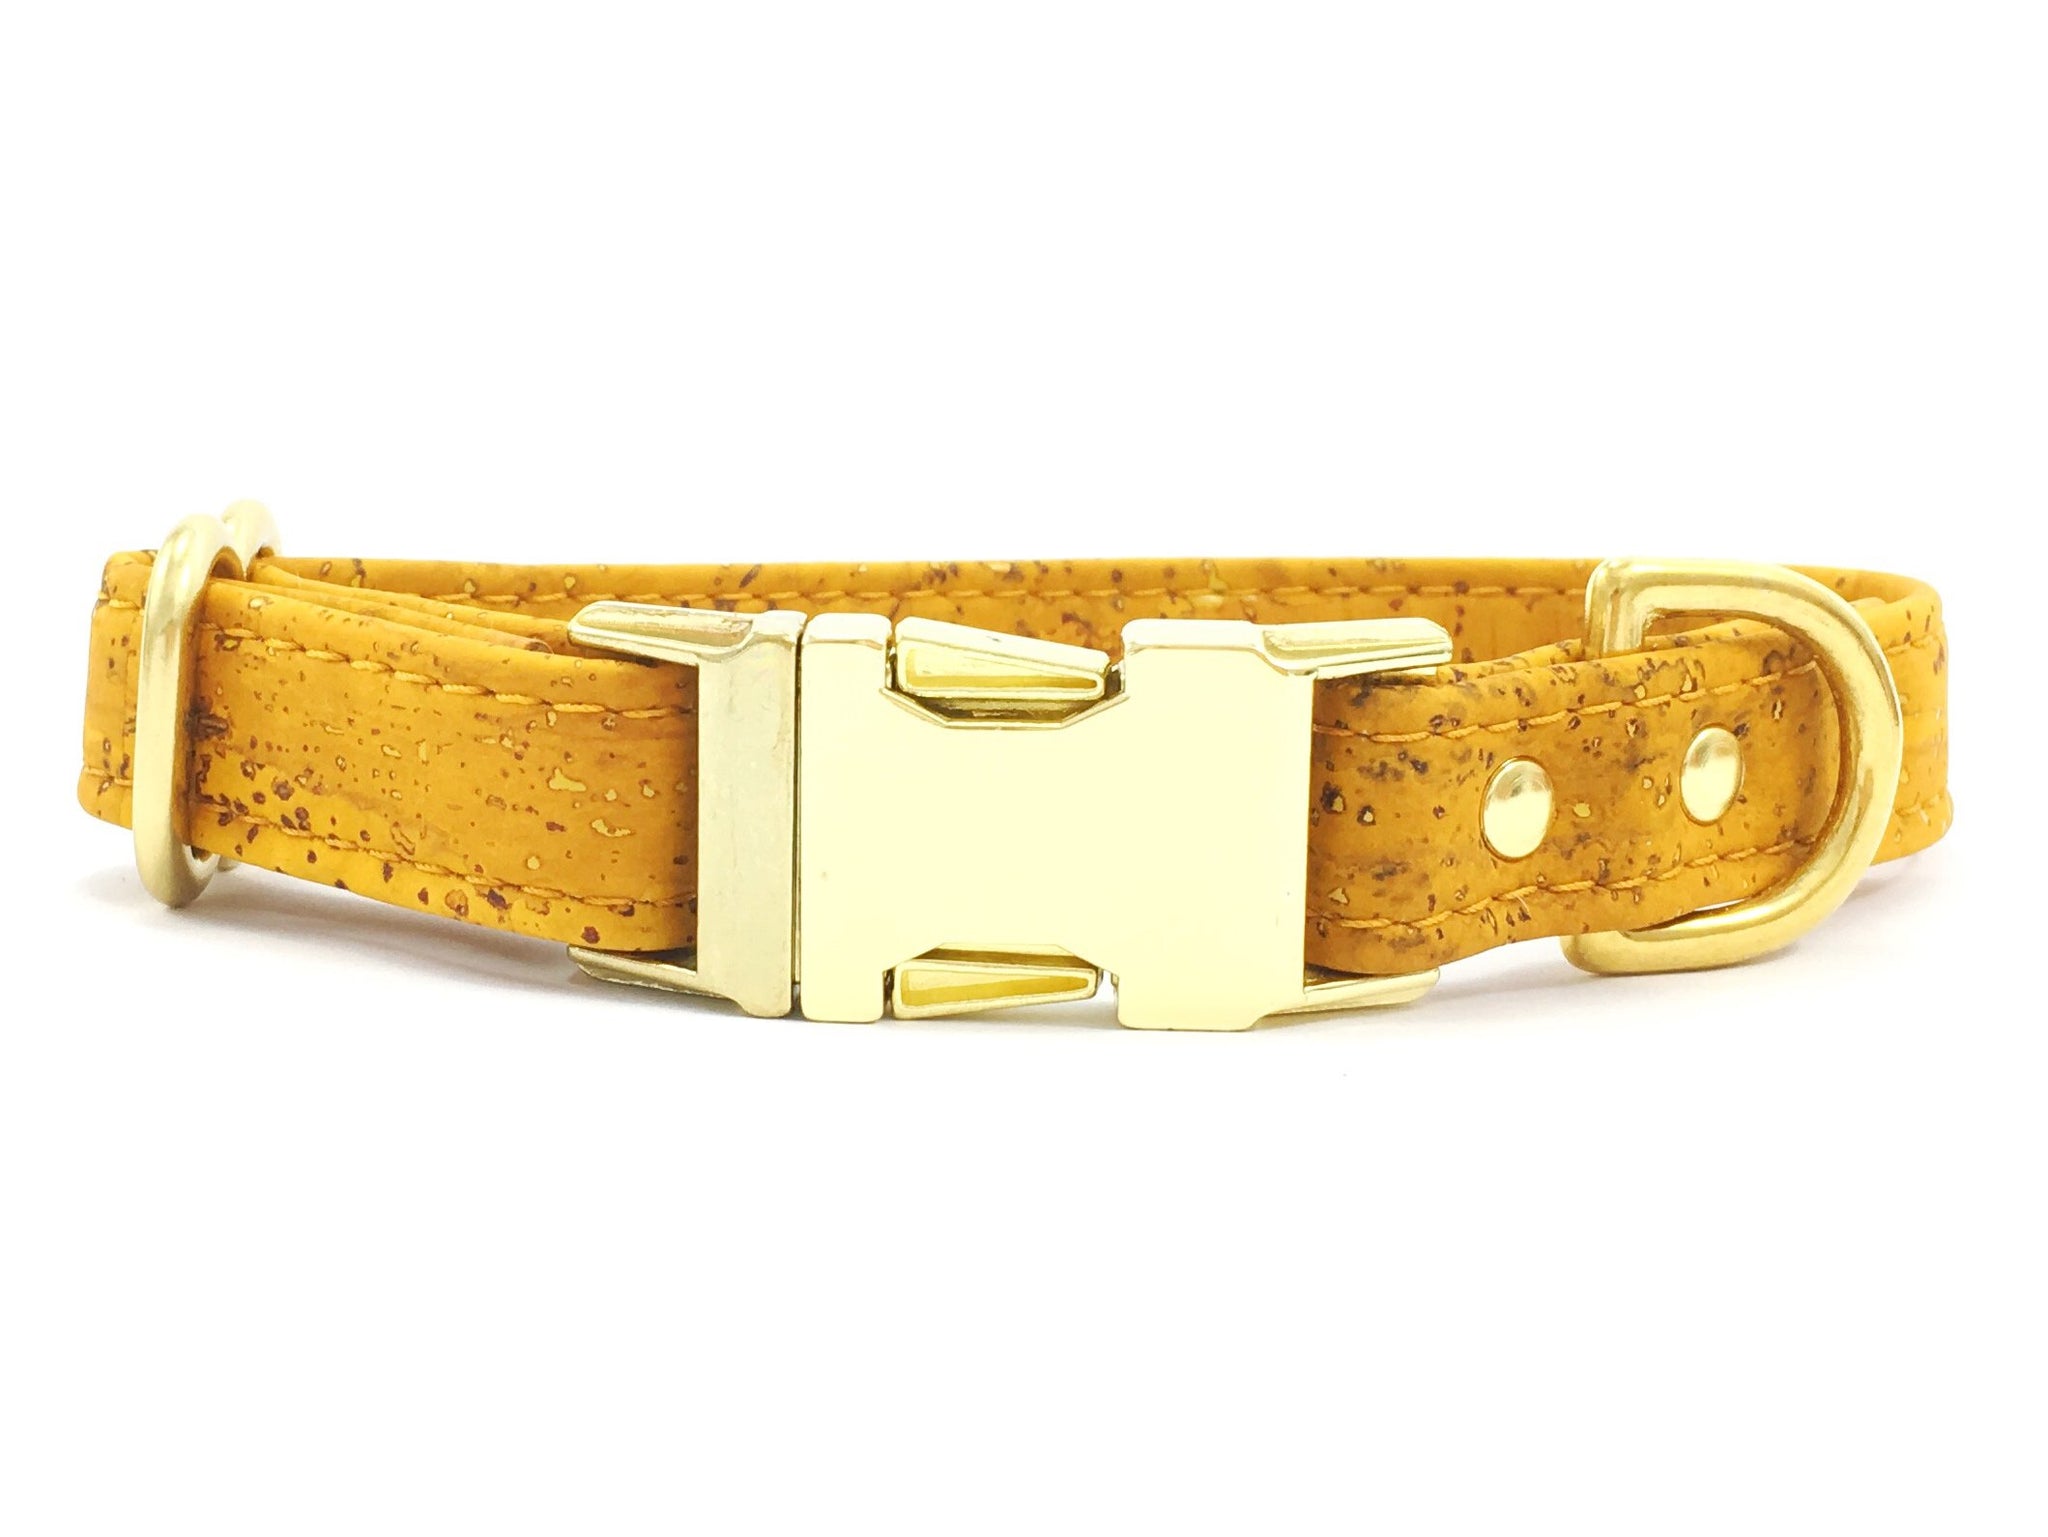 Yellow dog collar in luxury vegan cork leather with brass buckle, made in the UK